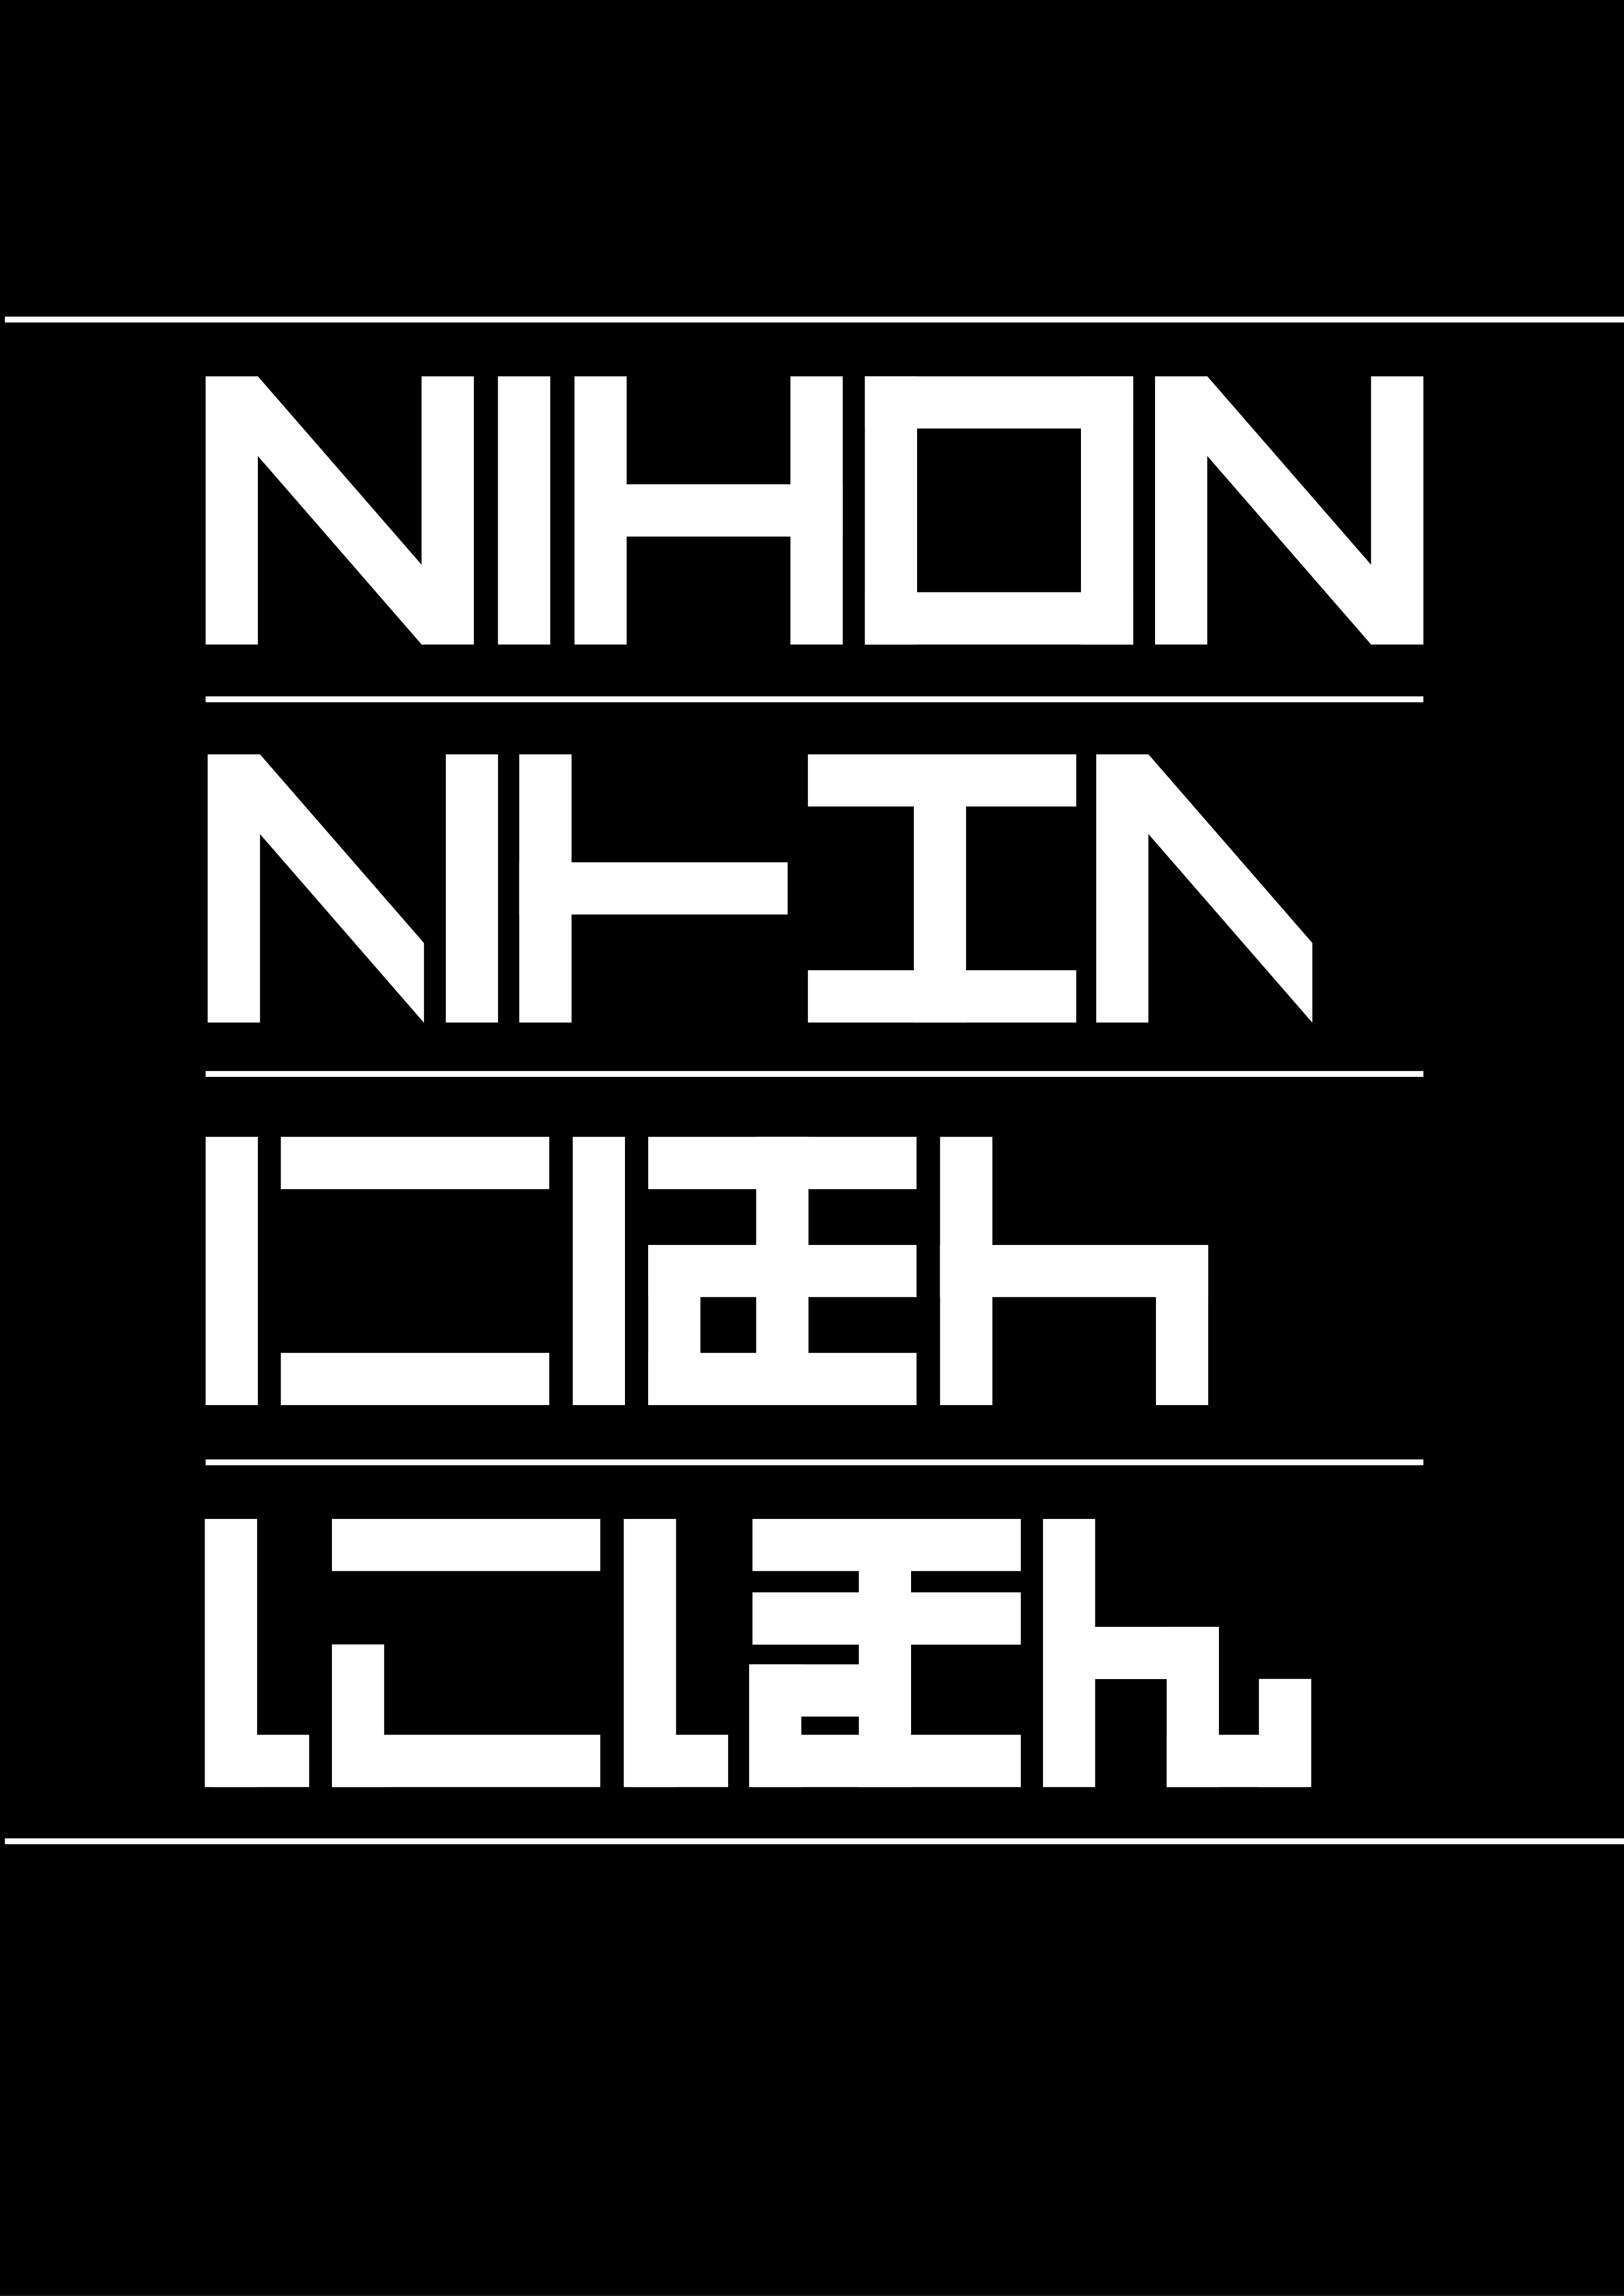 Printed piece showing transition between 'Nihon' in English and Japanese